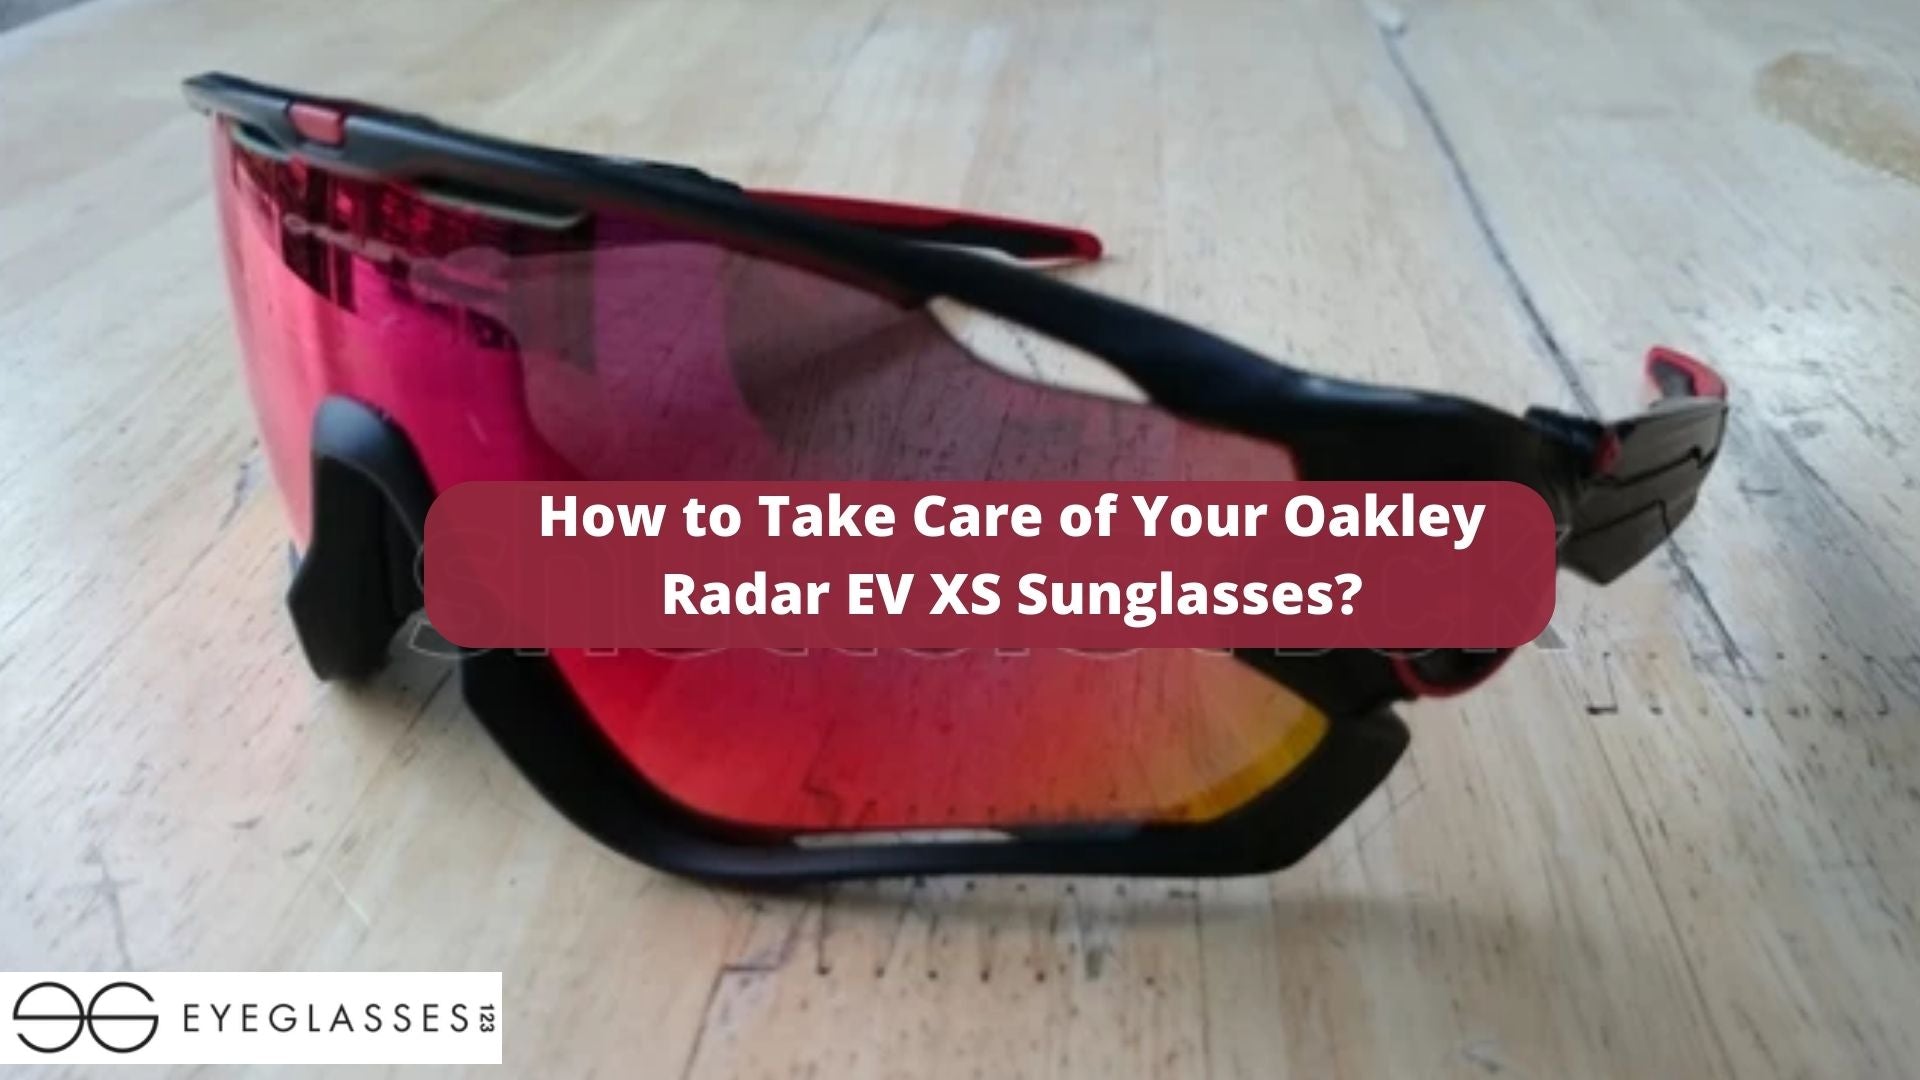 How to Take Care of Your Oakley Radar EV XS Sunglasses?